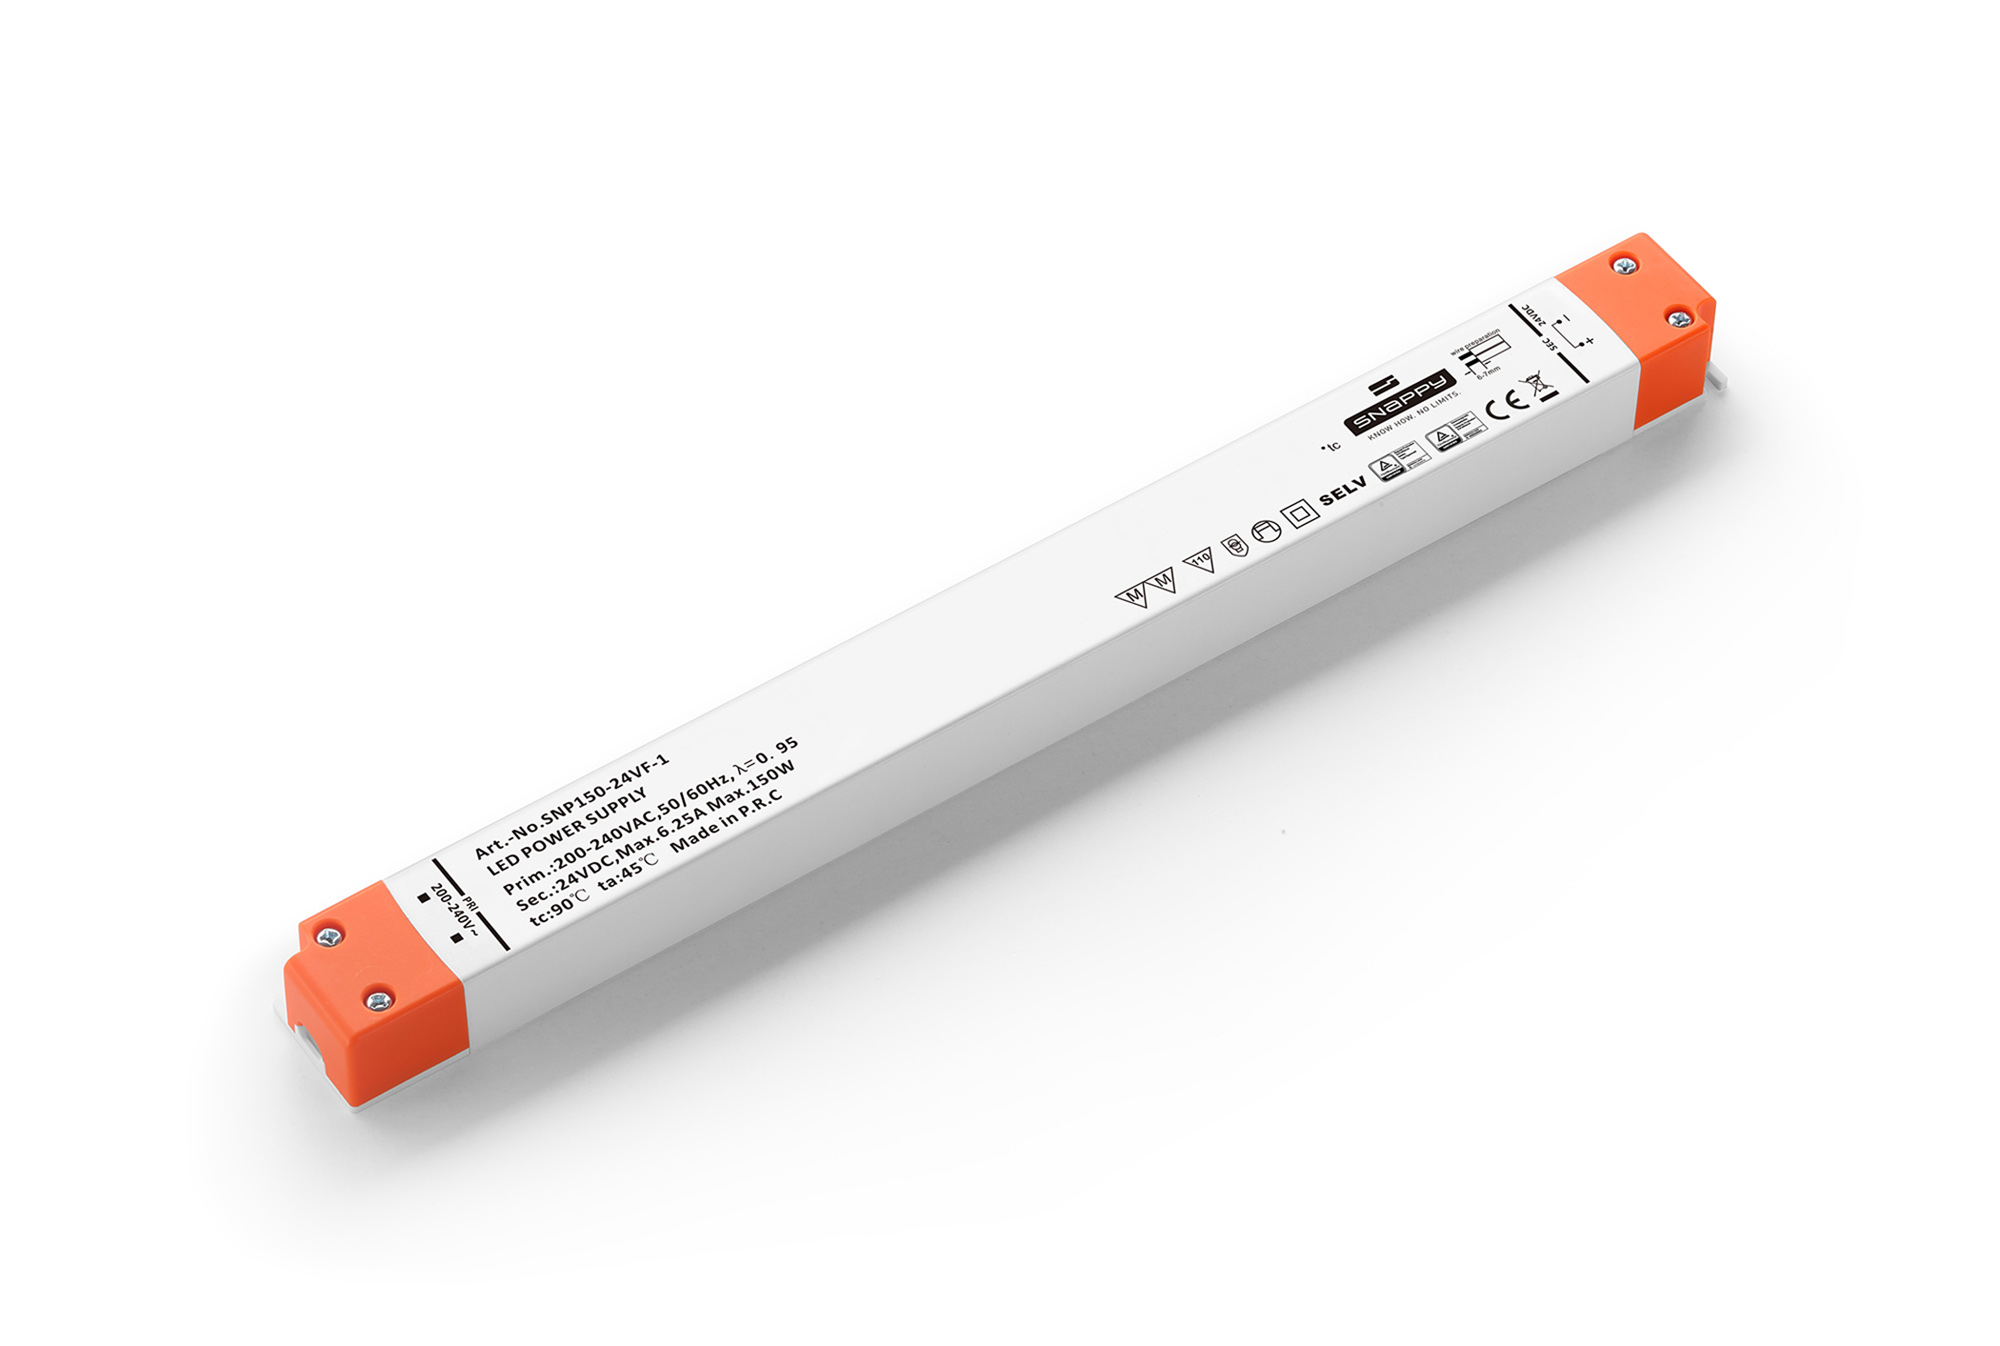 SNP150-24VF-1  SNP; 150W Constant Voltage Non-Dimmable LED Driver 24VDC 6.25A IP20.